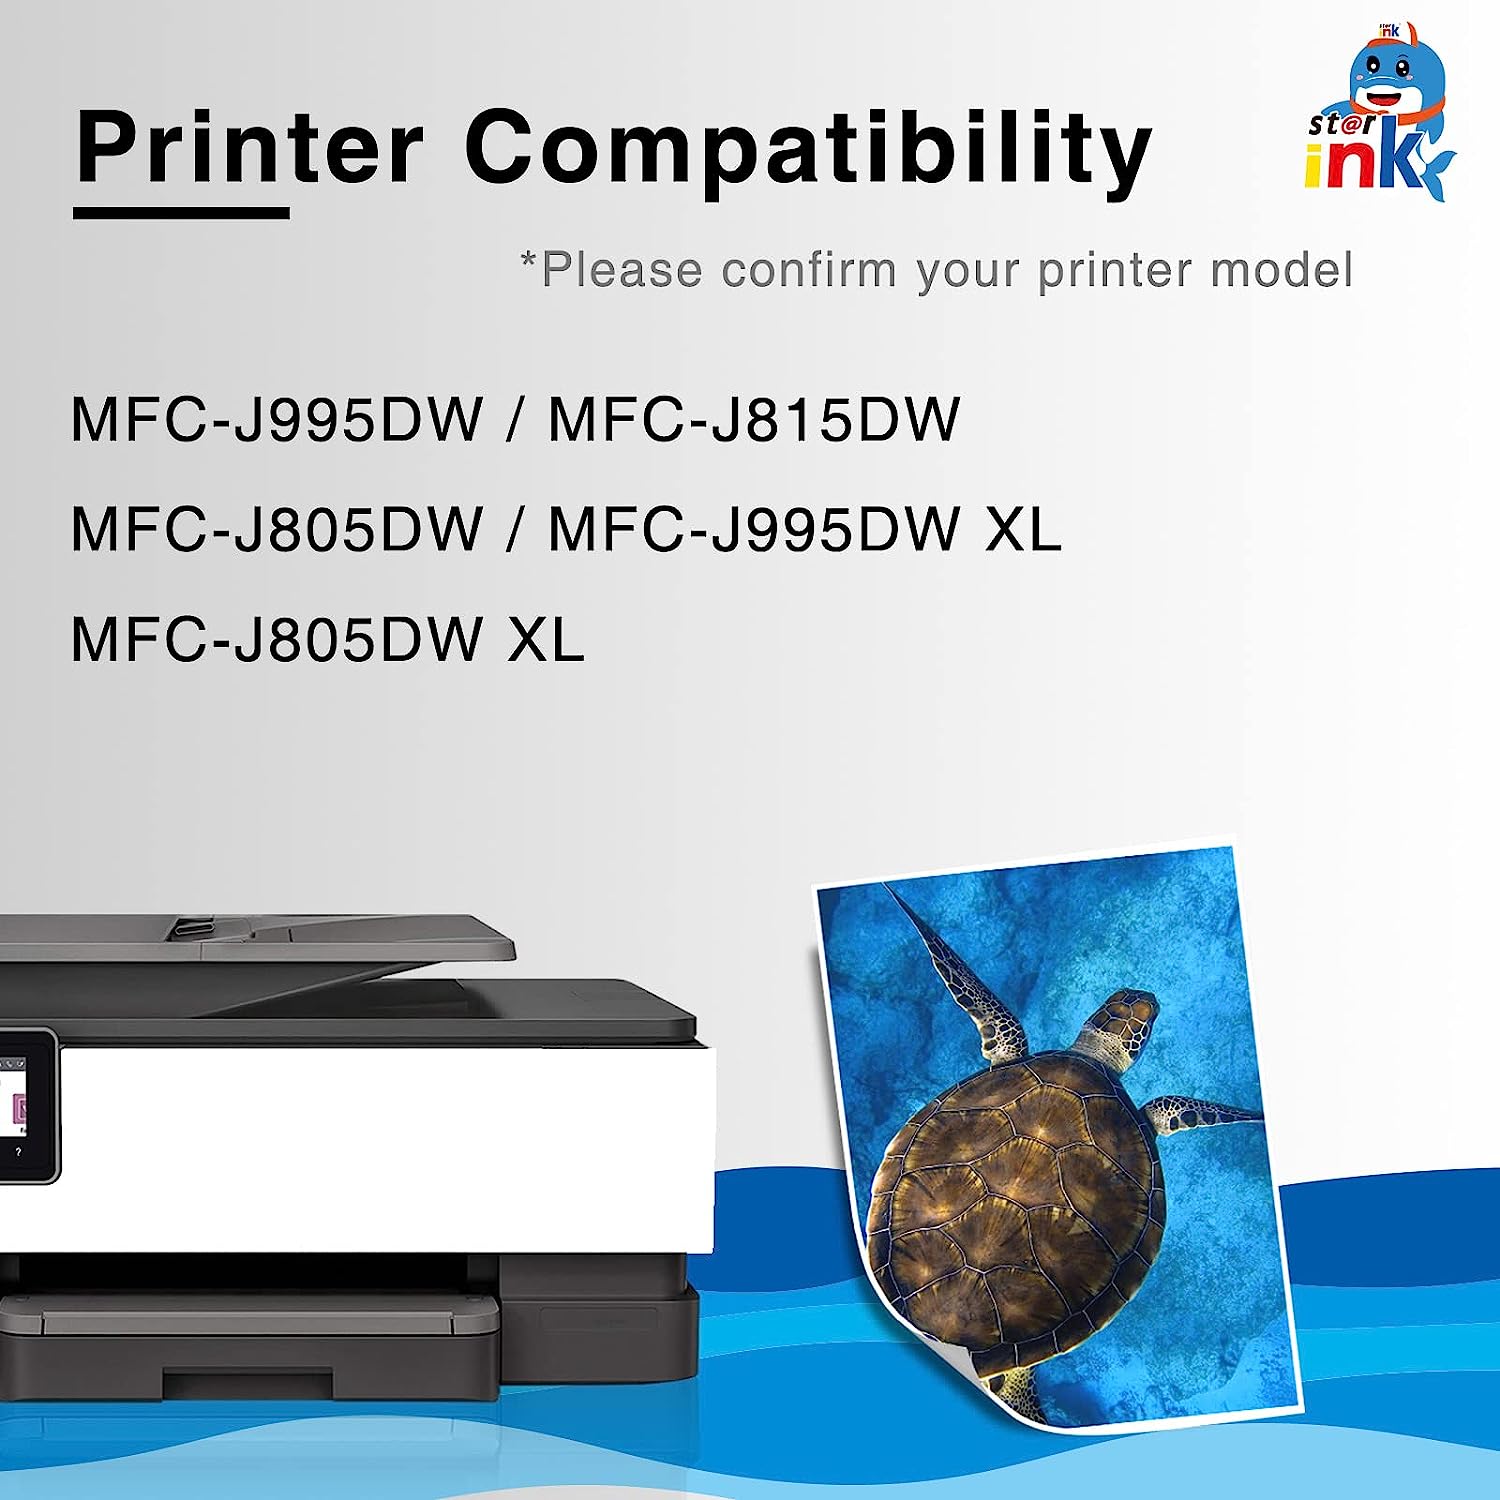 LC3033 Compatible Ink Cartridge Replacement for Brother Printer(BK/C/M/Y), 4 Packs - Linford Office:Printer Ink & Toner Cartridge